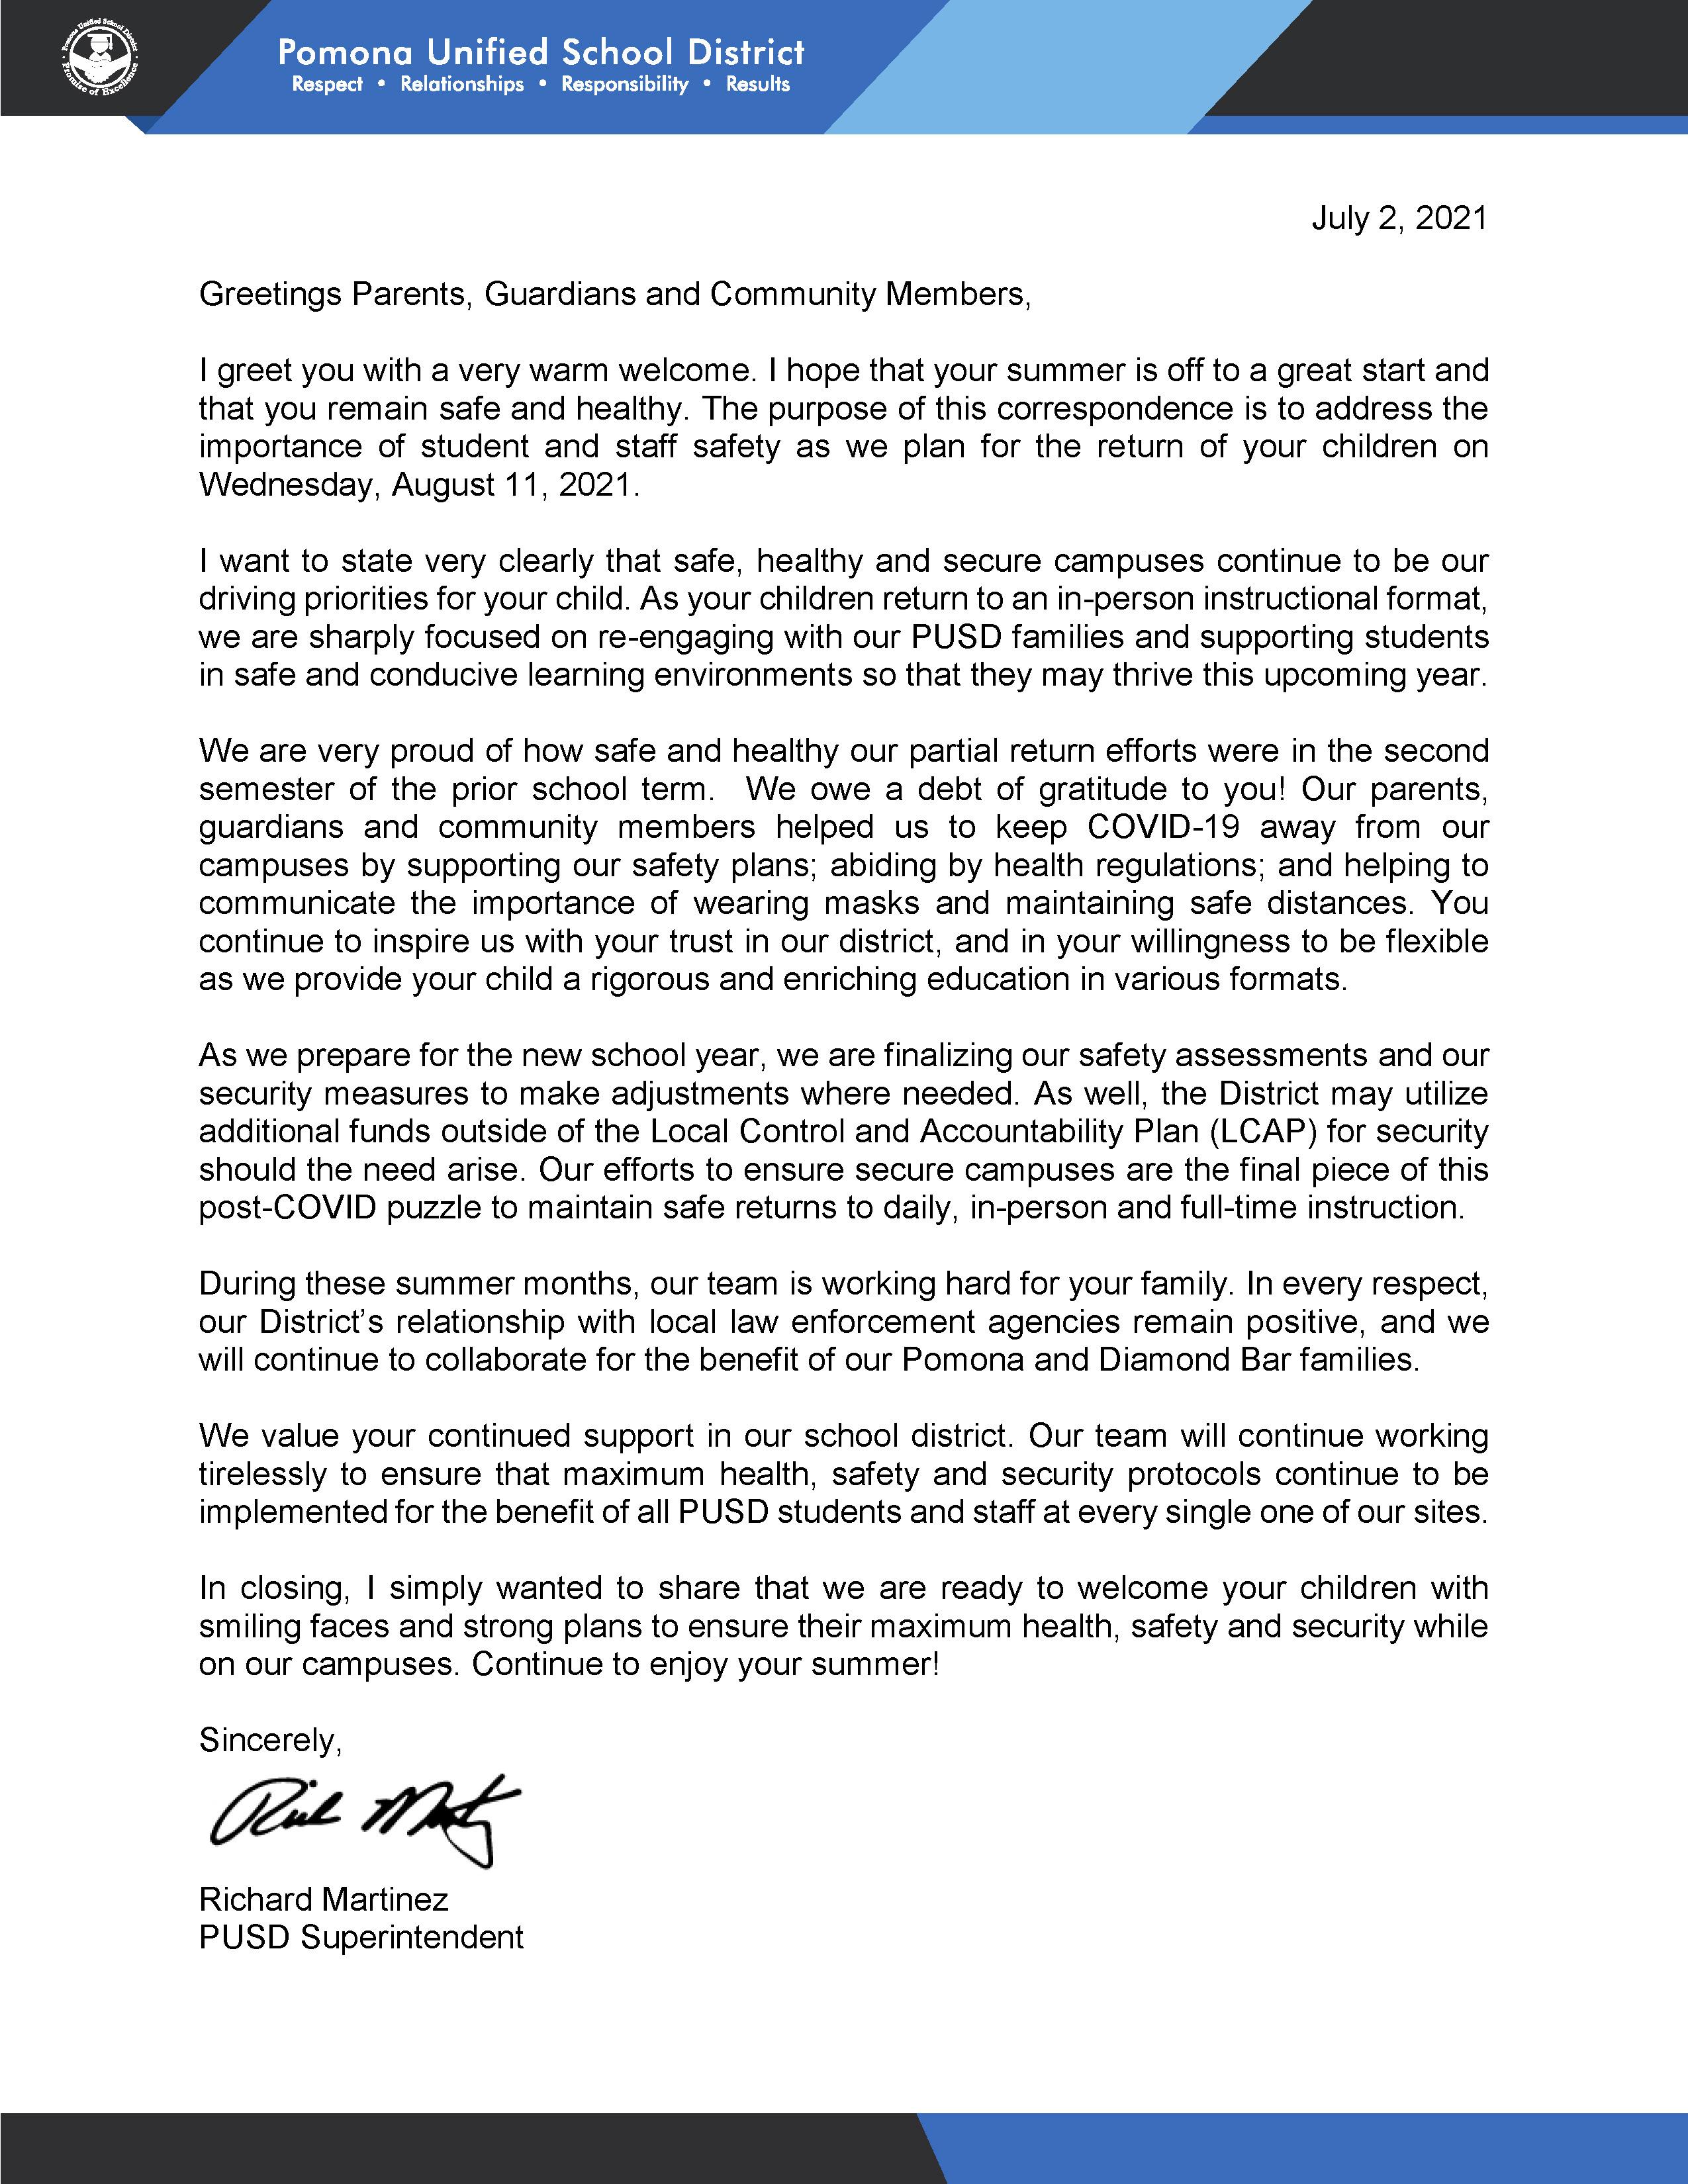 Superintendent Martinez Summer Letter to the Community